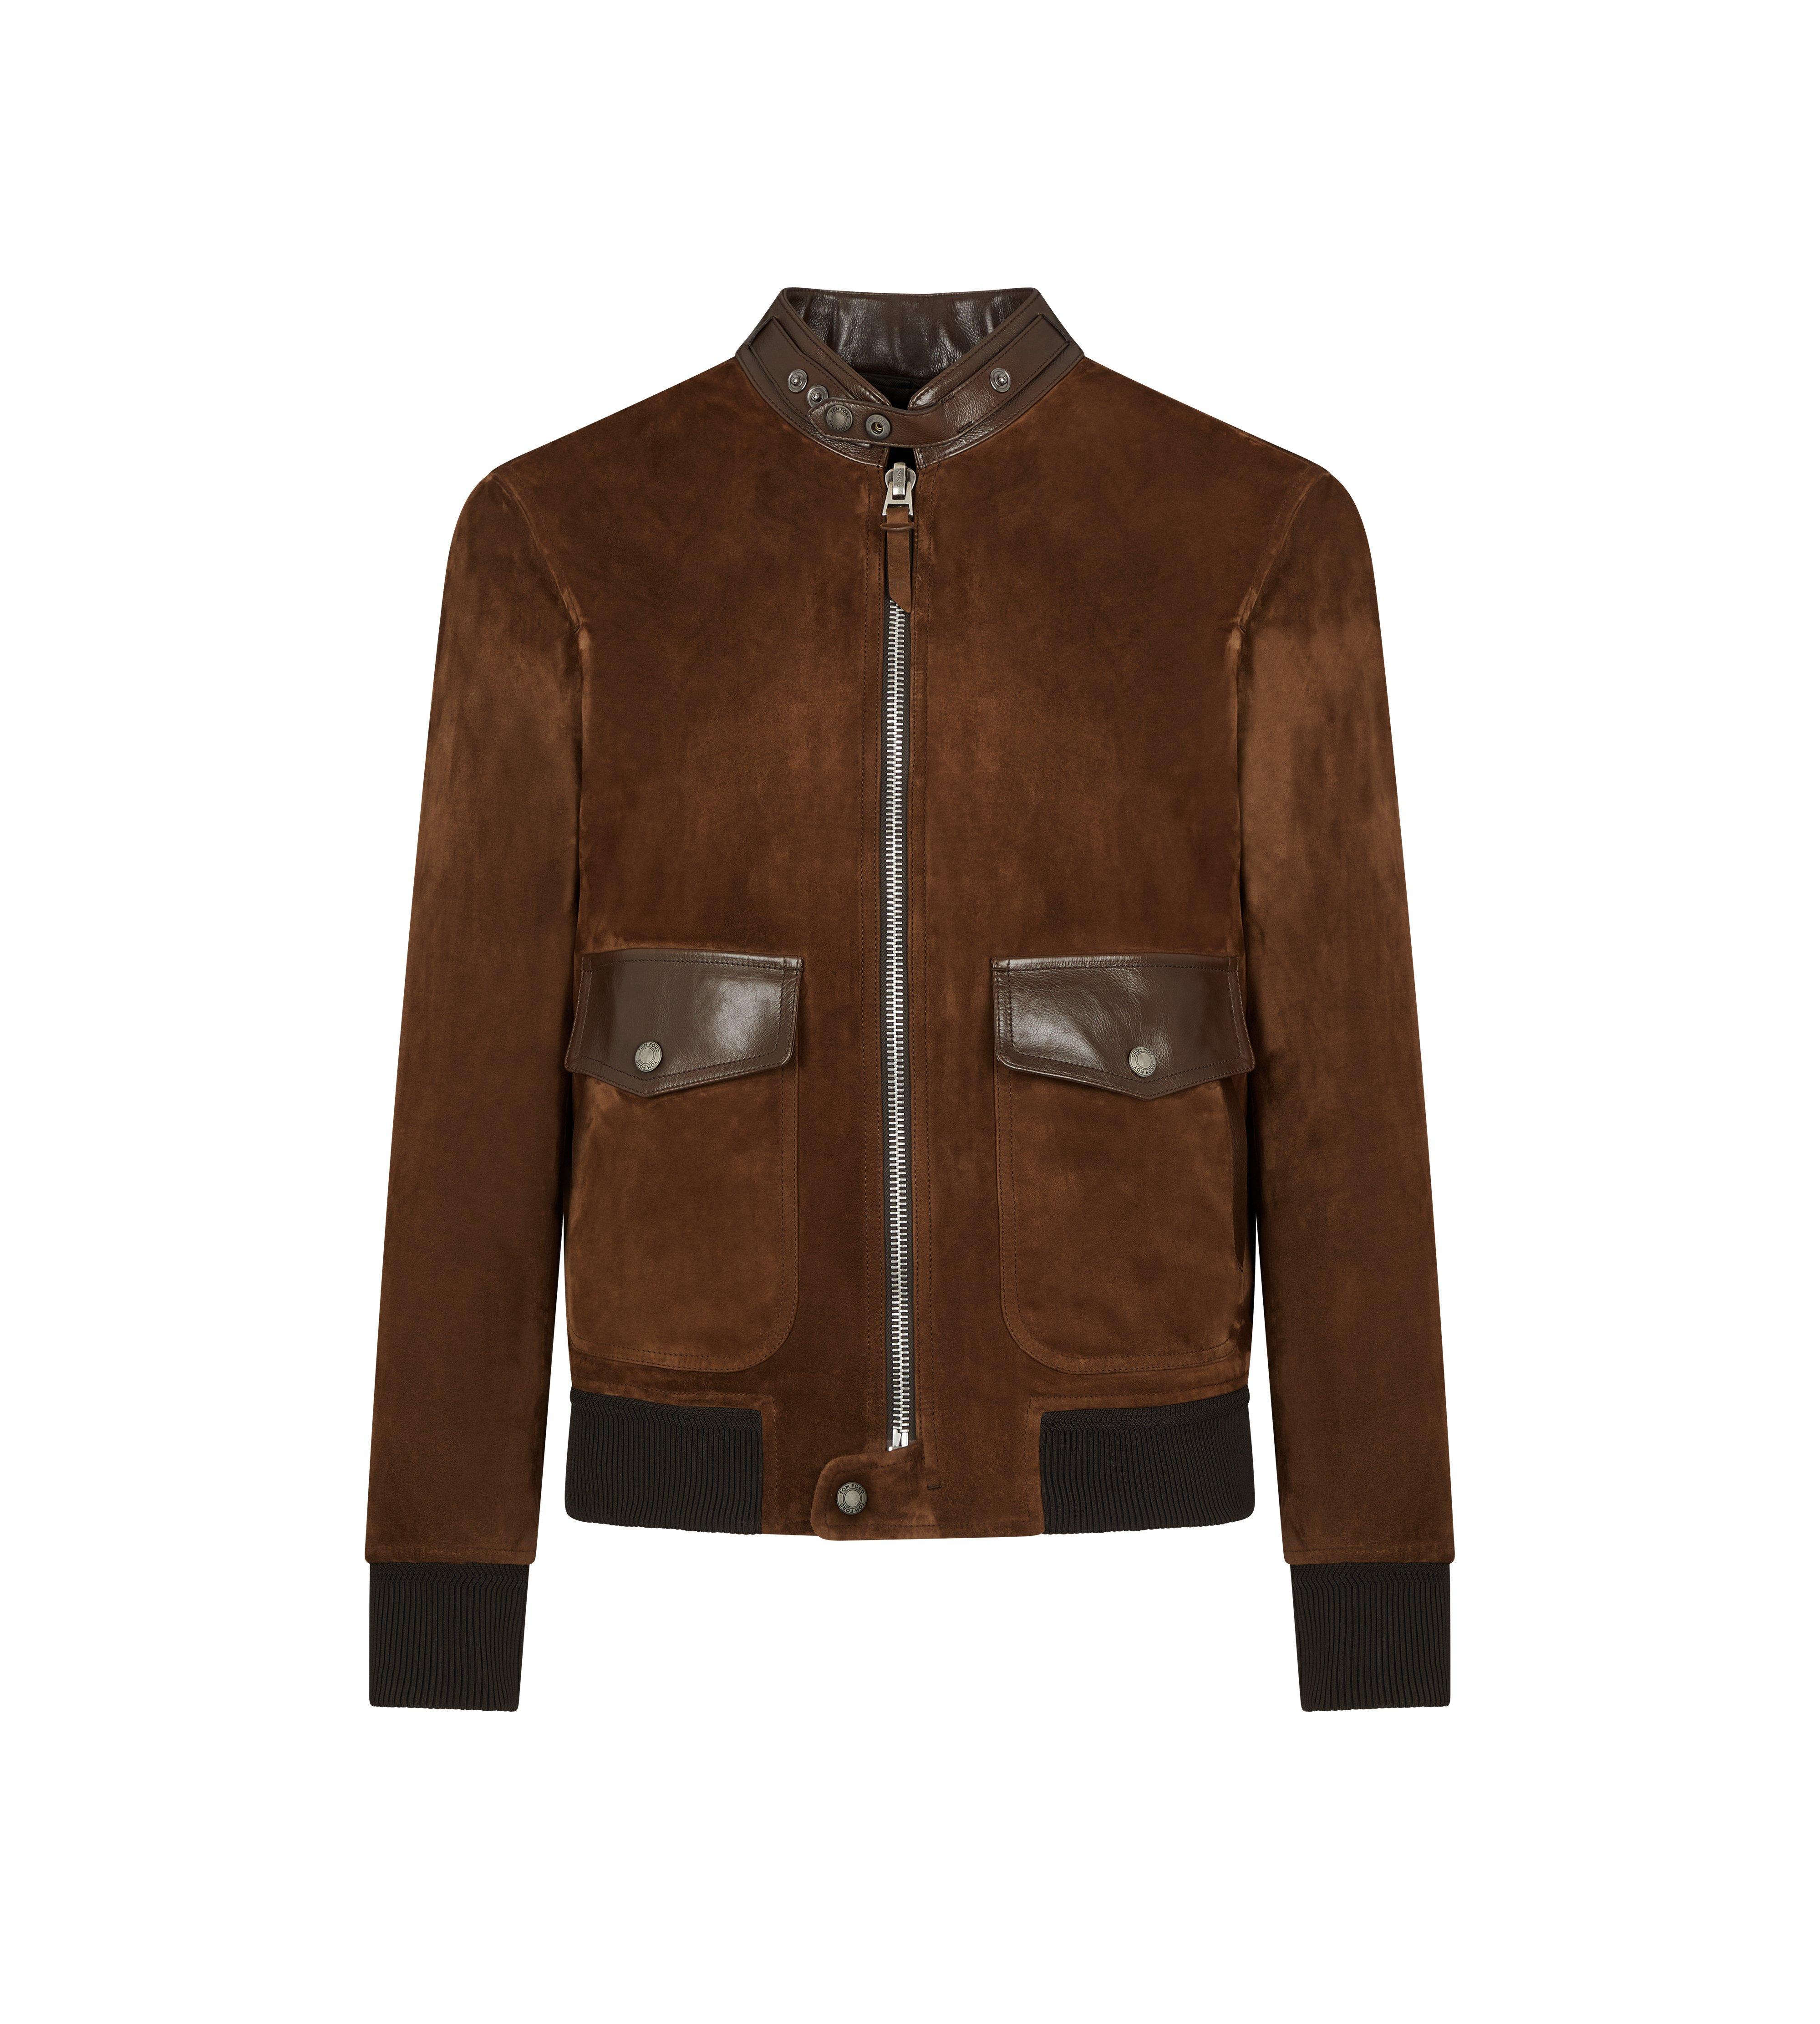 Outerwear - TOM FORD | Men's Pants | TomFord.co.uk